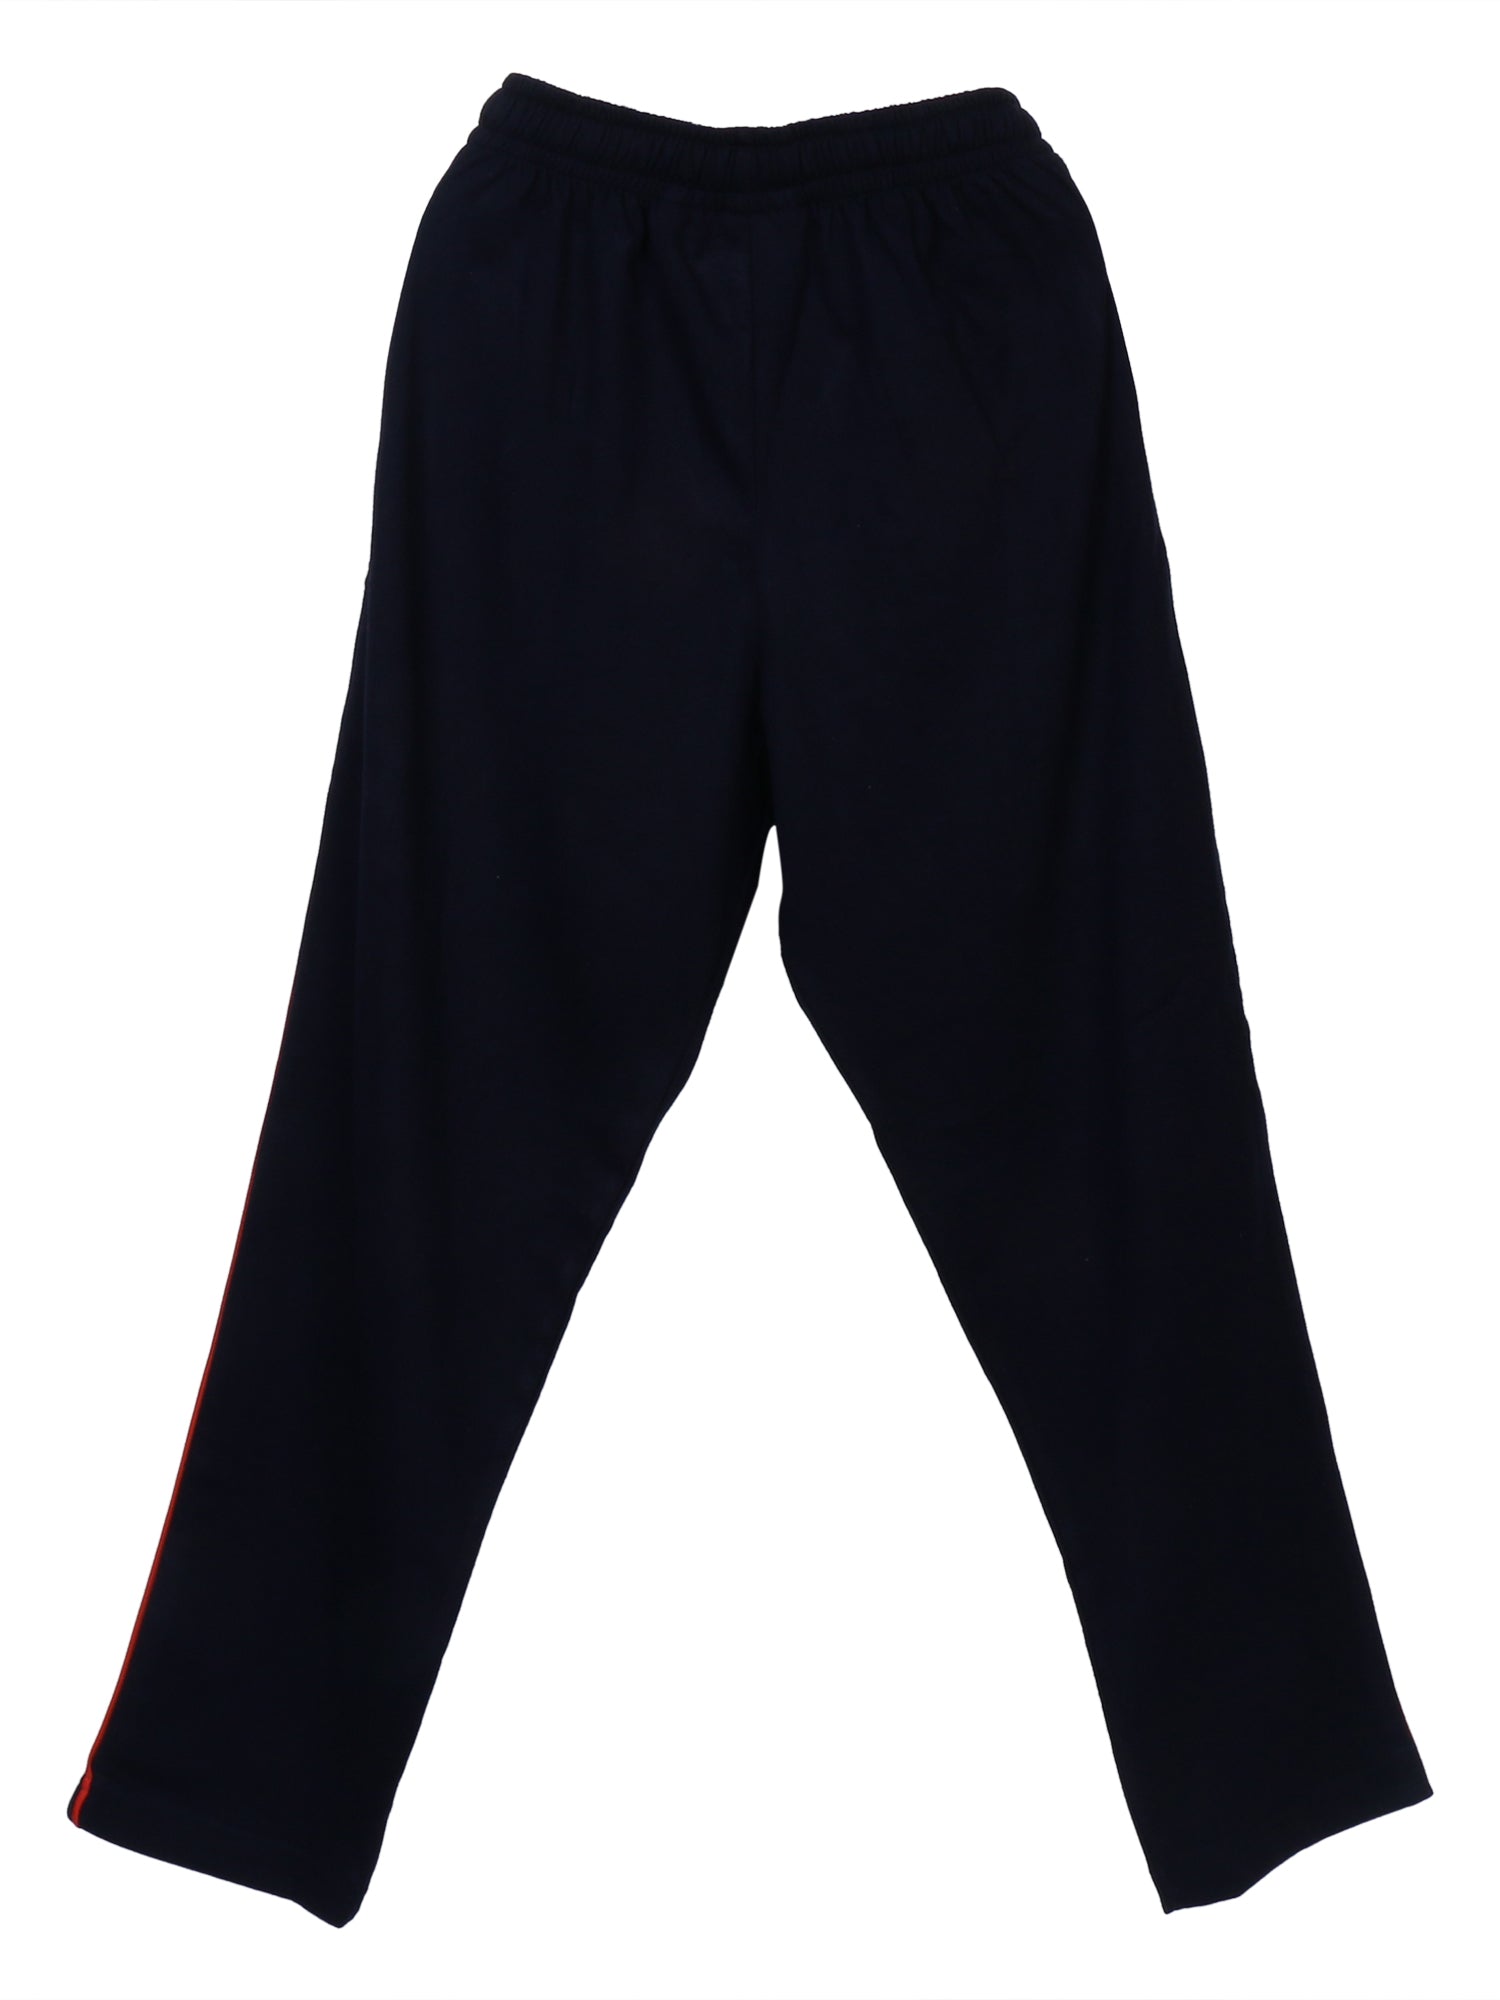 Cotton Track Pants for Kids Boys Pack of 2